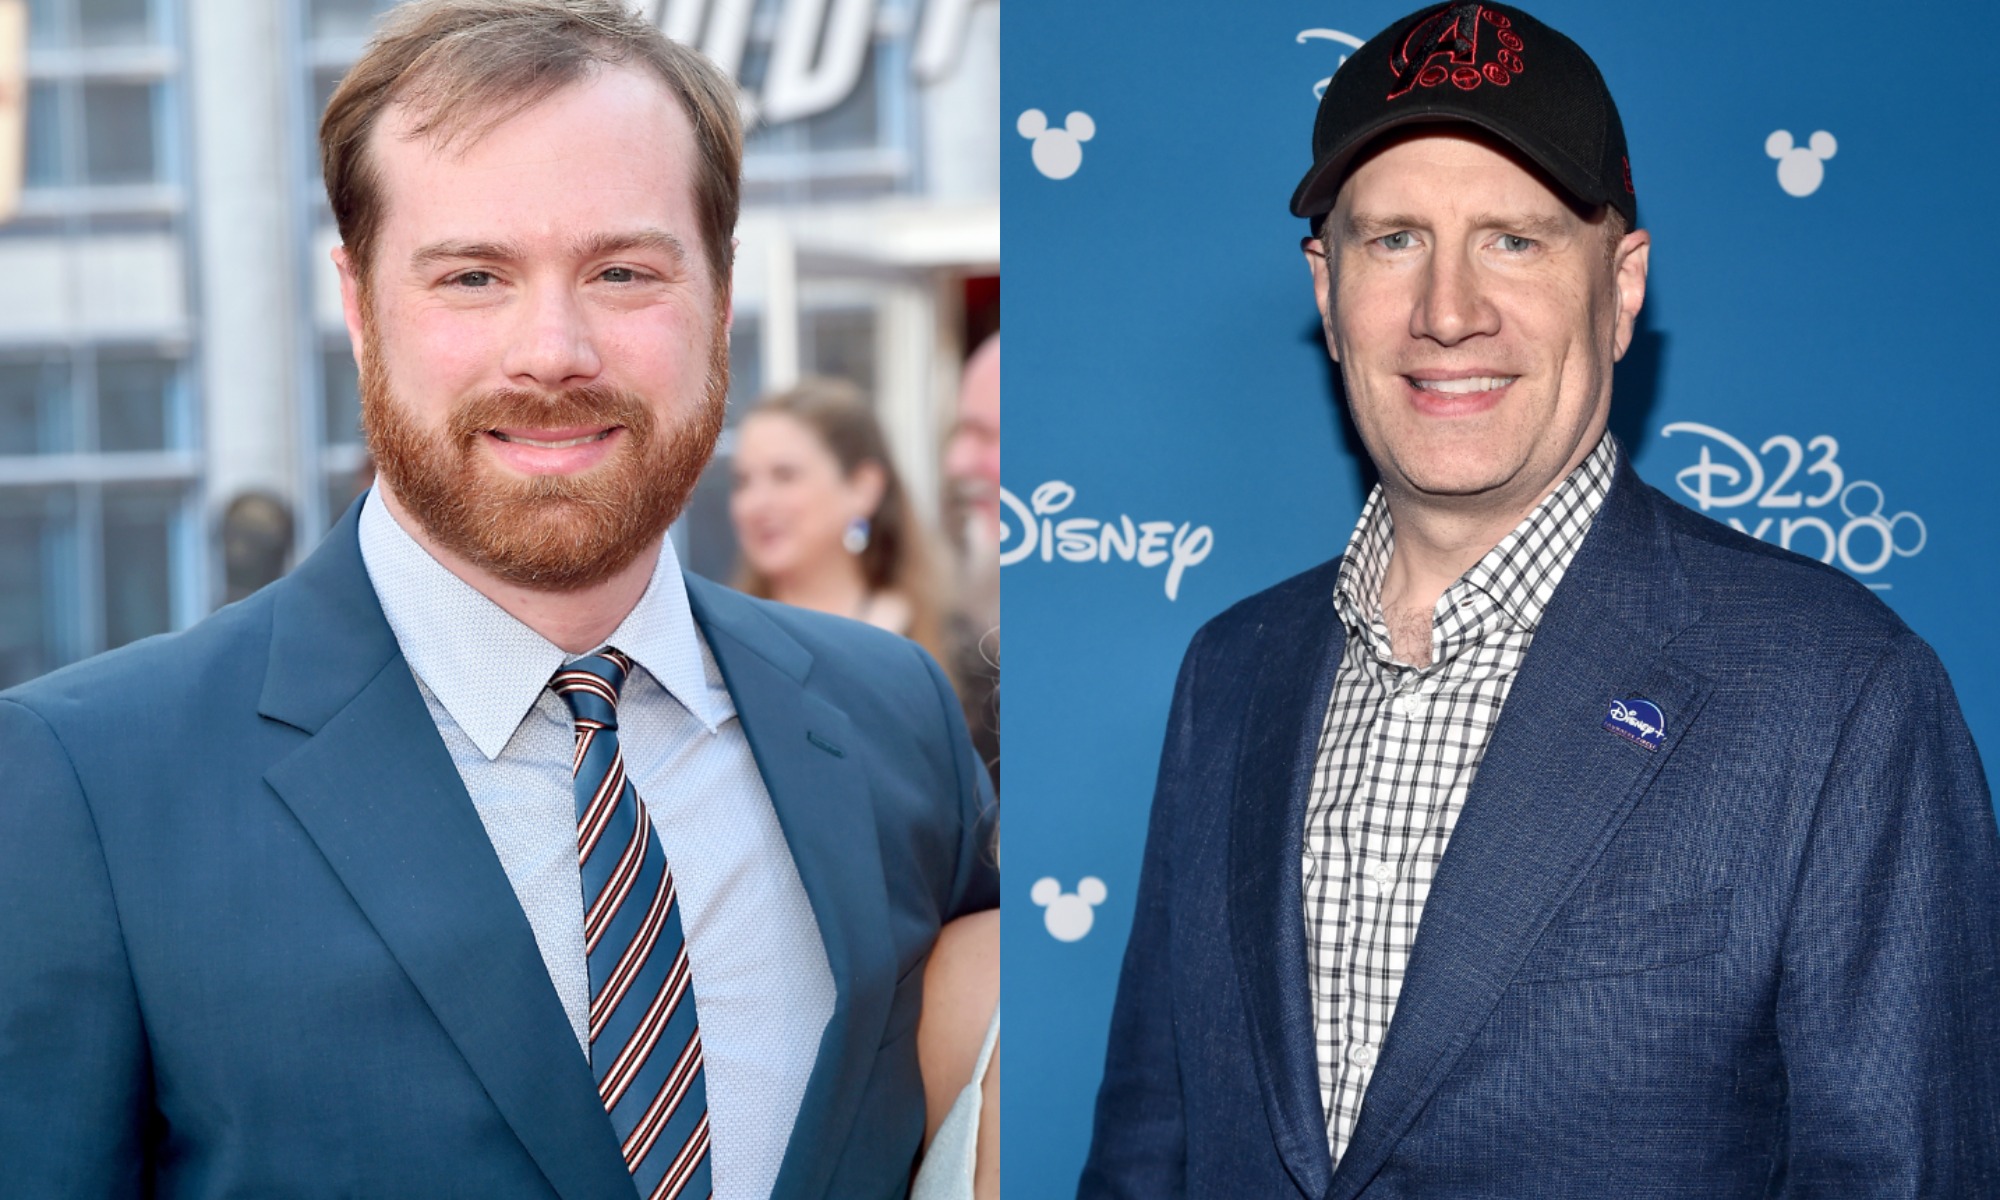 (L-R): Stephen Broussard wearing a blue suit and standing in front of a white and blue building; Kevin Feige wearing a blue suit, checkered shirt and baseball cap and standing in front of a blue Disney+ wall